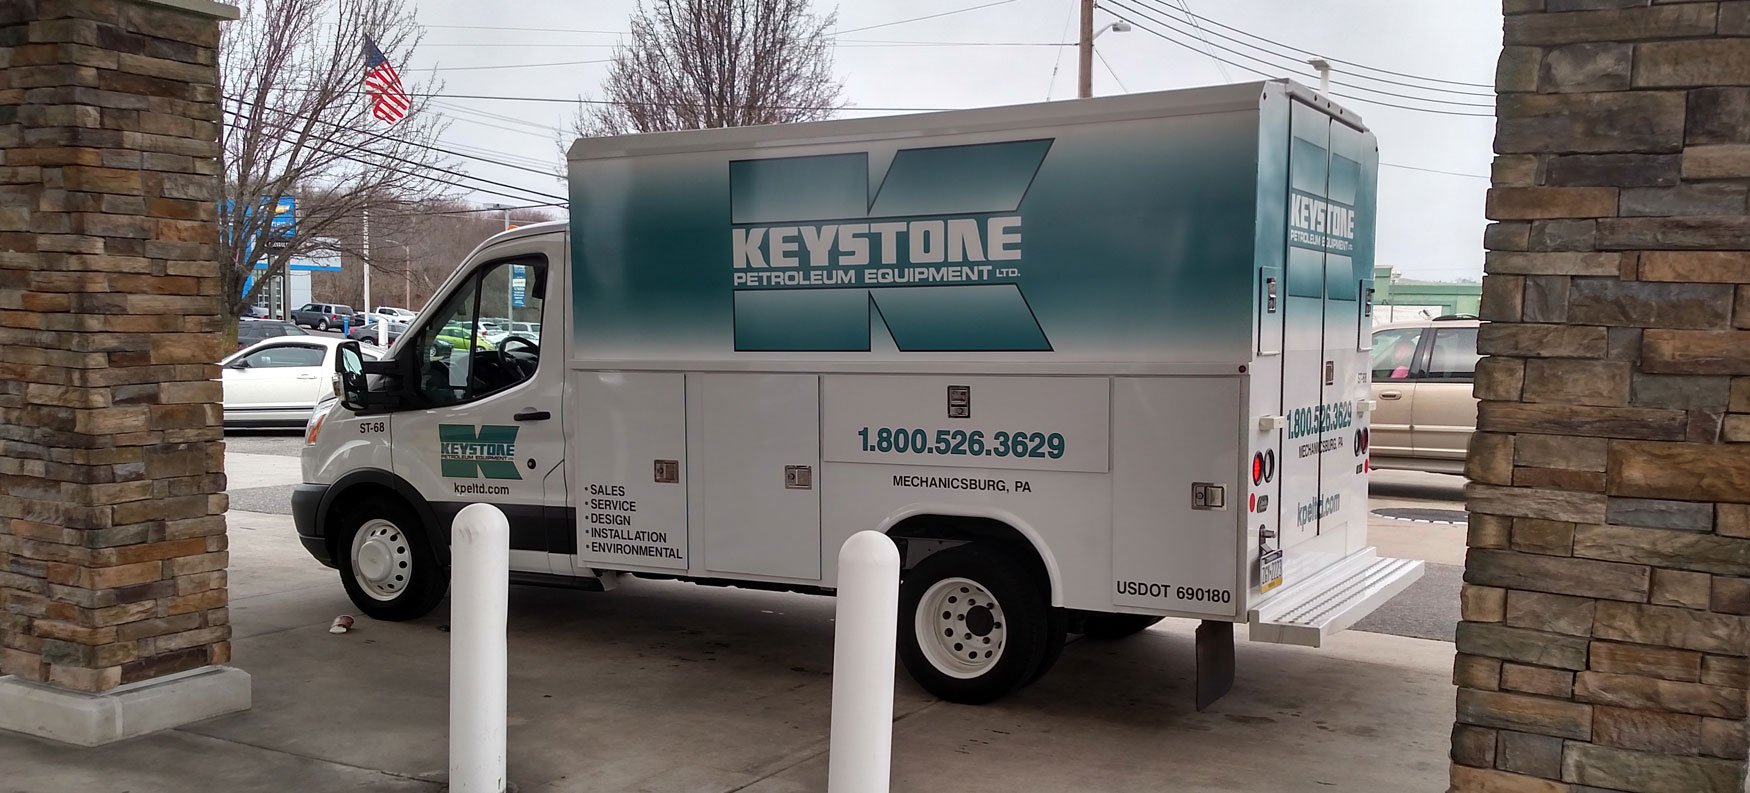 Keystone Petroleum Equipment - full service petroleum contractor serving Pennsylvania, Maryland, and New Jersey